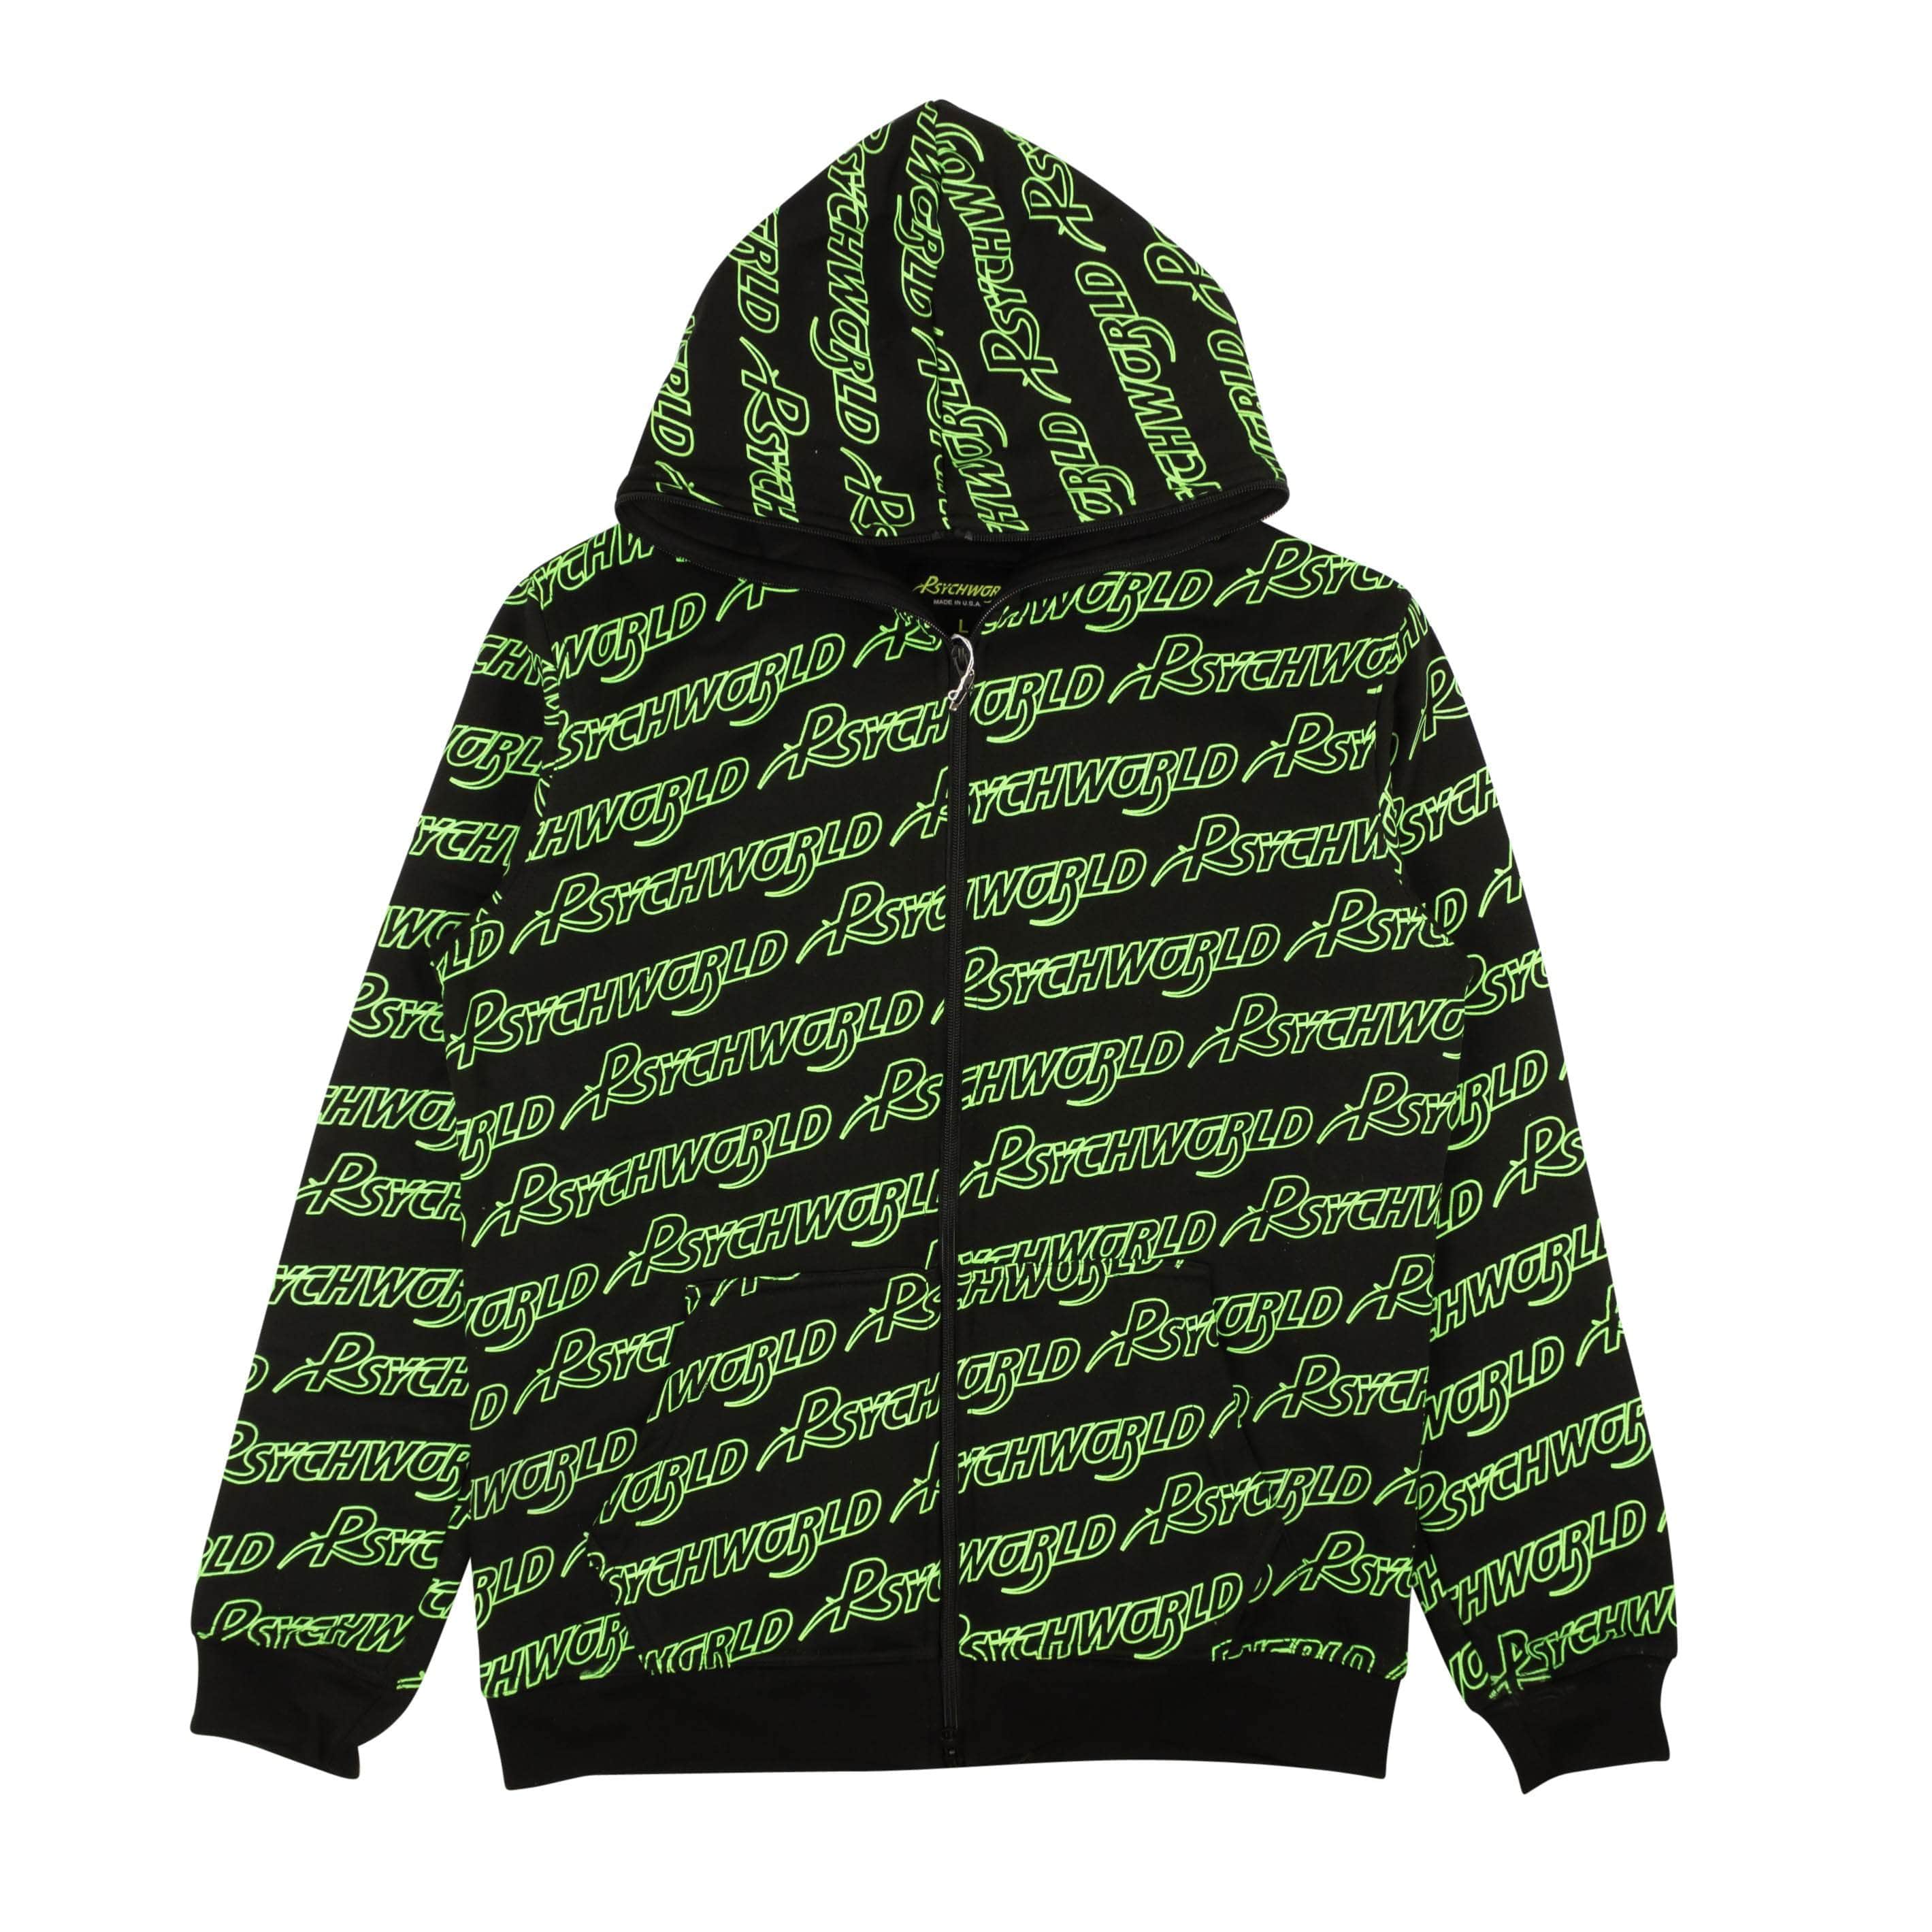 Psychworld channelenable-all, chicmi, couponcollection, gender-mens, main-clothing, mens-shoes, MixedApparel, psychworld, SPO, under-250 M / Allover_Logo_Zip_Up_Hoodie_Green 95-PSY-1052/S Allover_Logo_Zip_Up_Hoodie_Green Green PSYCHWORLD Allover Logo Zip-UP Hoodie 95-PSY-1052/M 95-PSY-1052/M